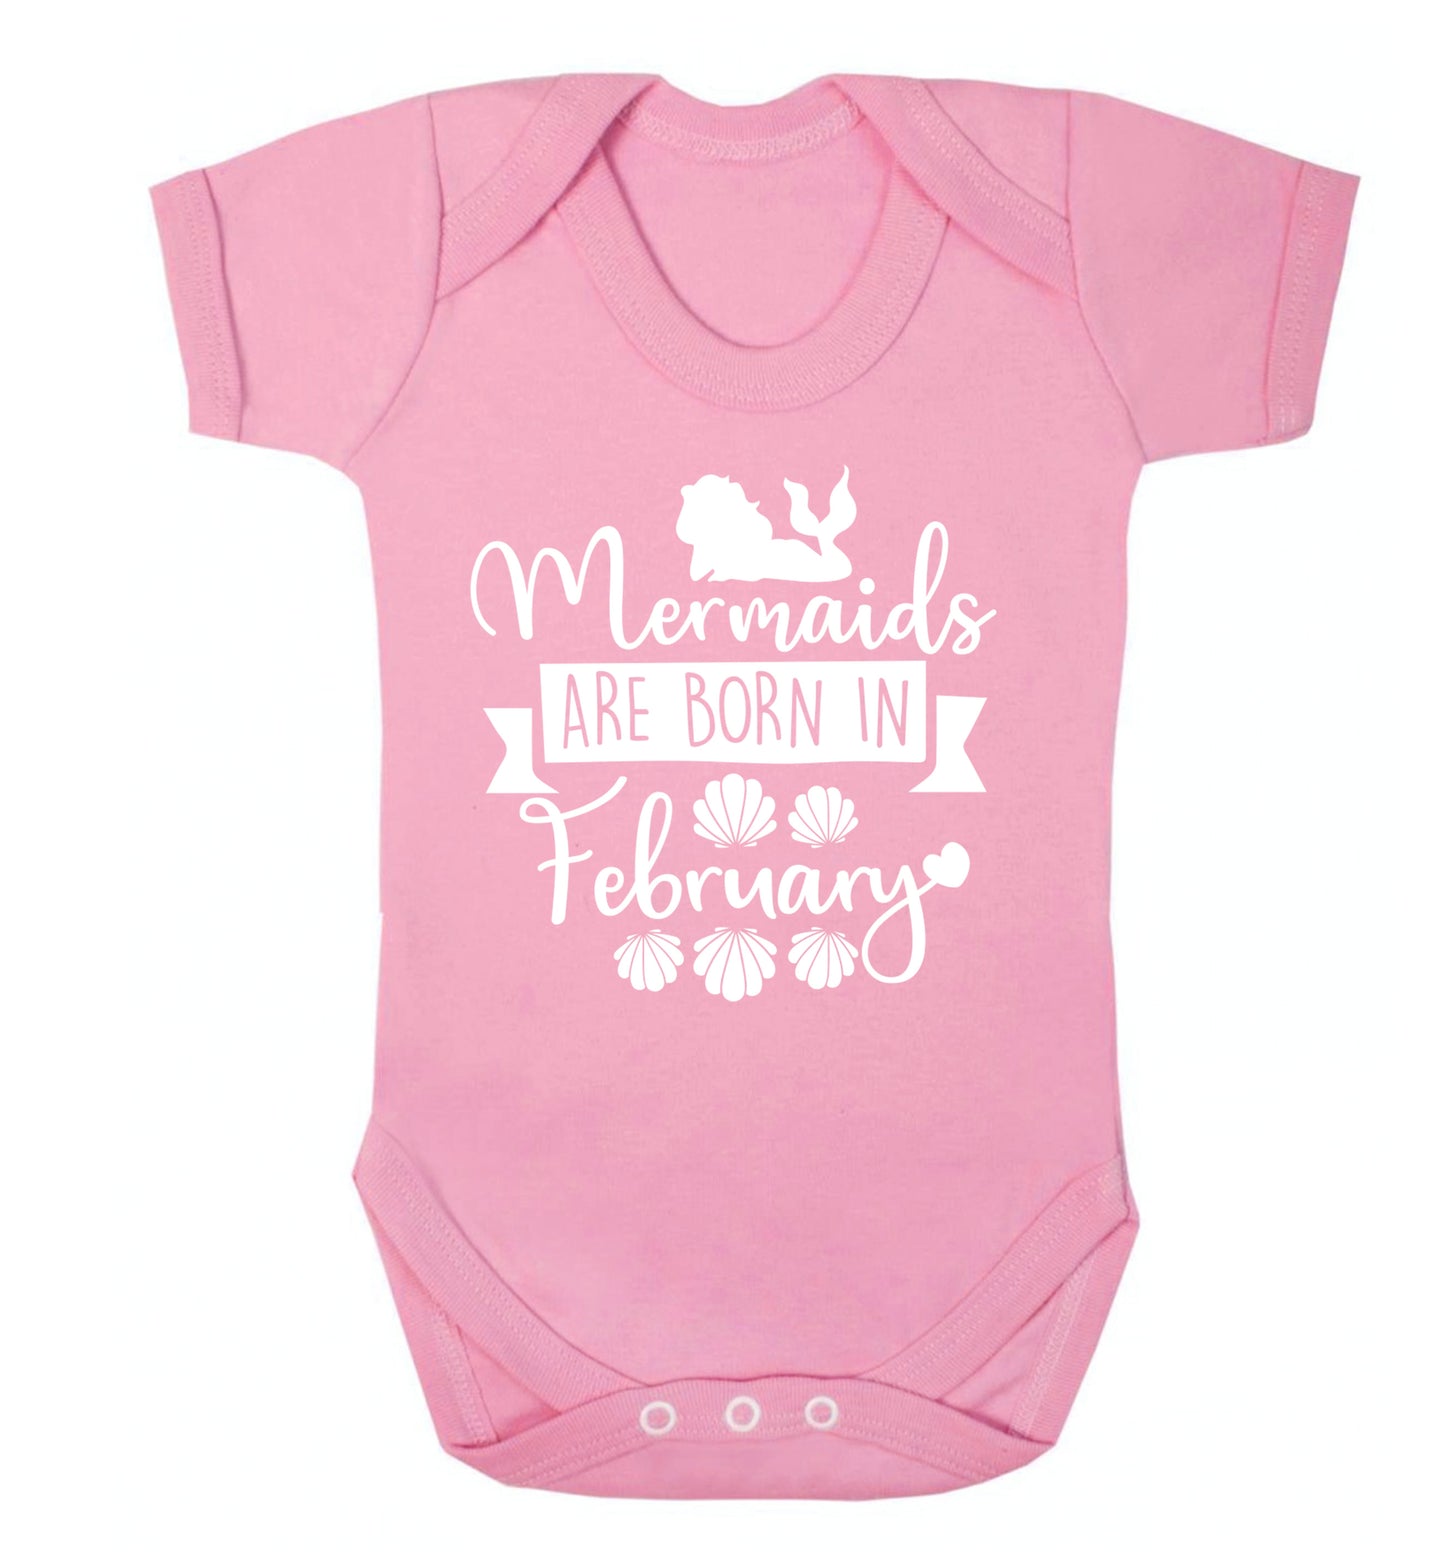 Mermaids are born in February Baby Vest pale pink 18-24 months